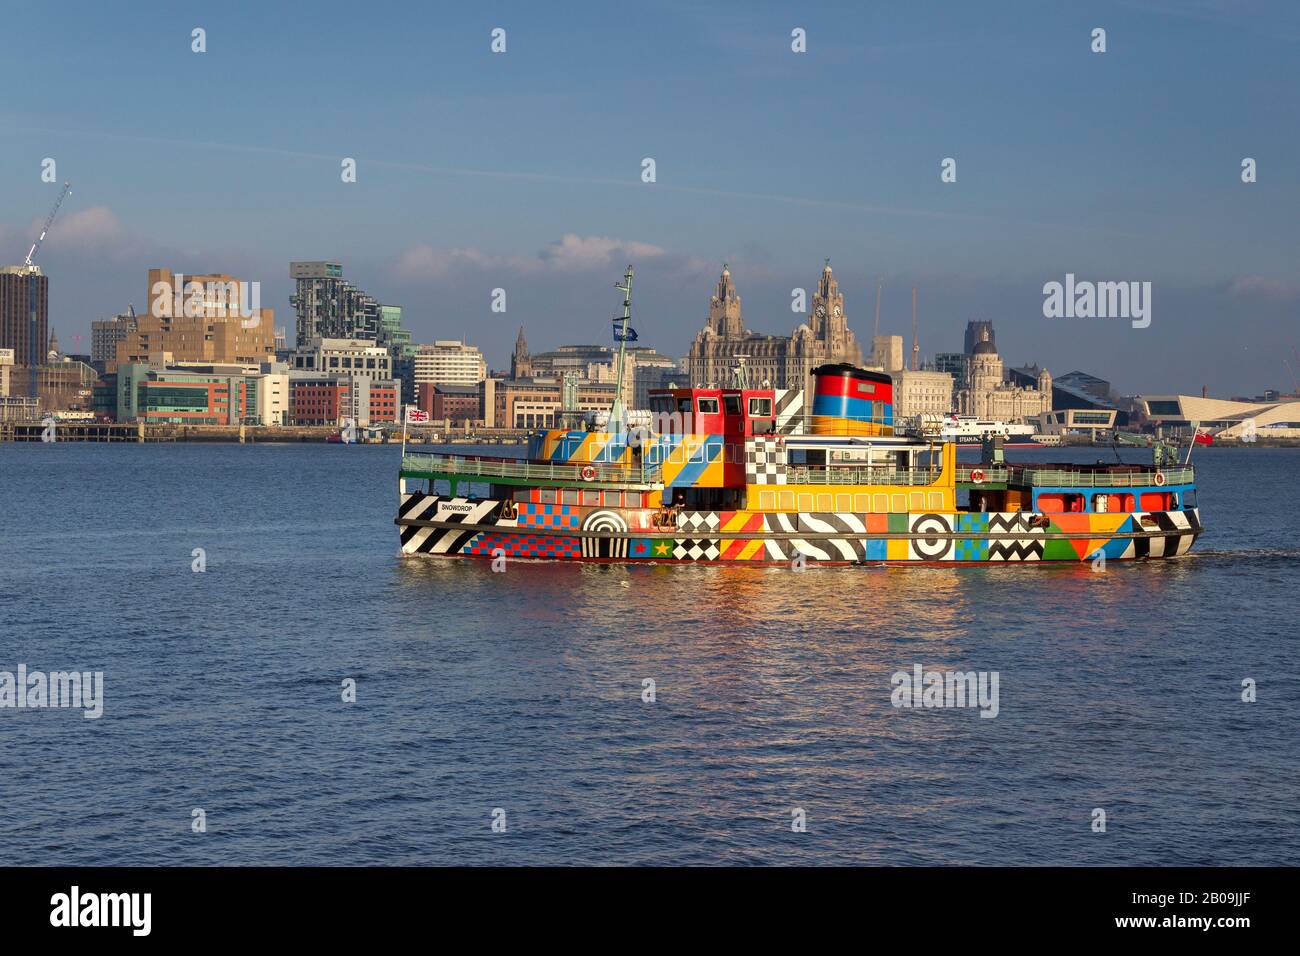 M.V. Snowdrop, Mersey ferry in Dazzle livery designed by Sir Peter Blake, against the Liverpool city skyline. Stock Photo